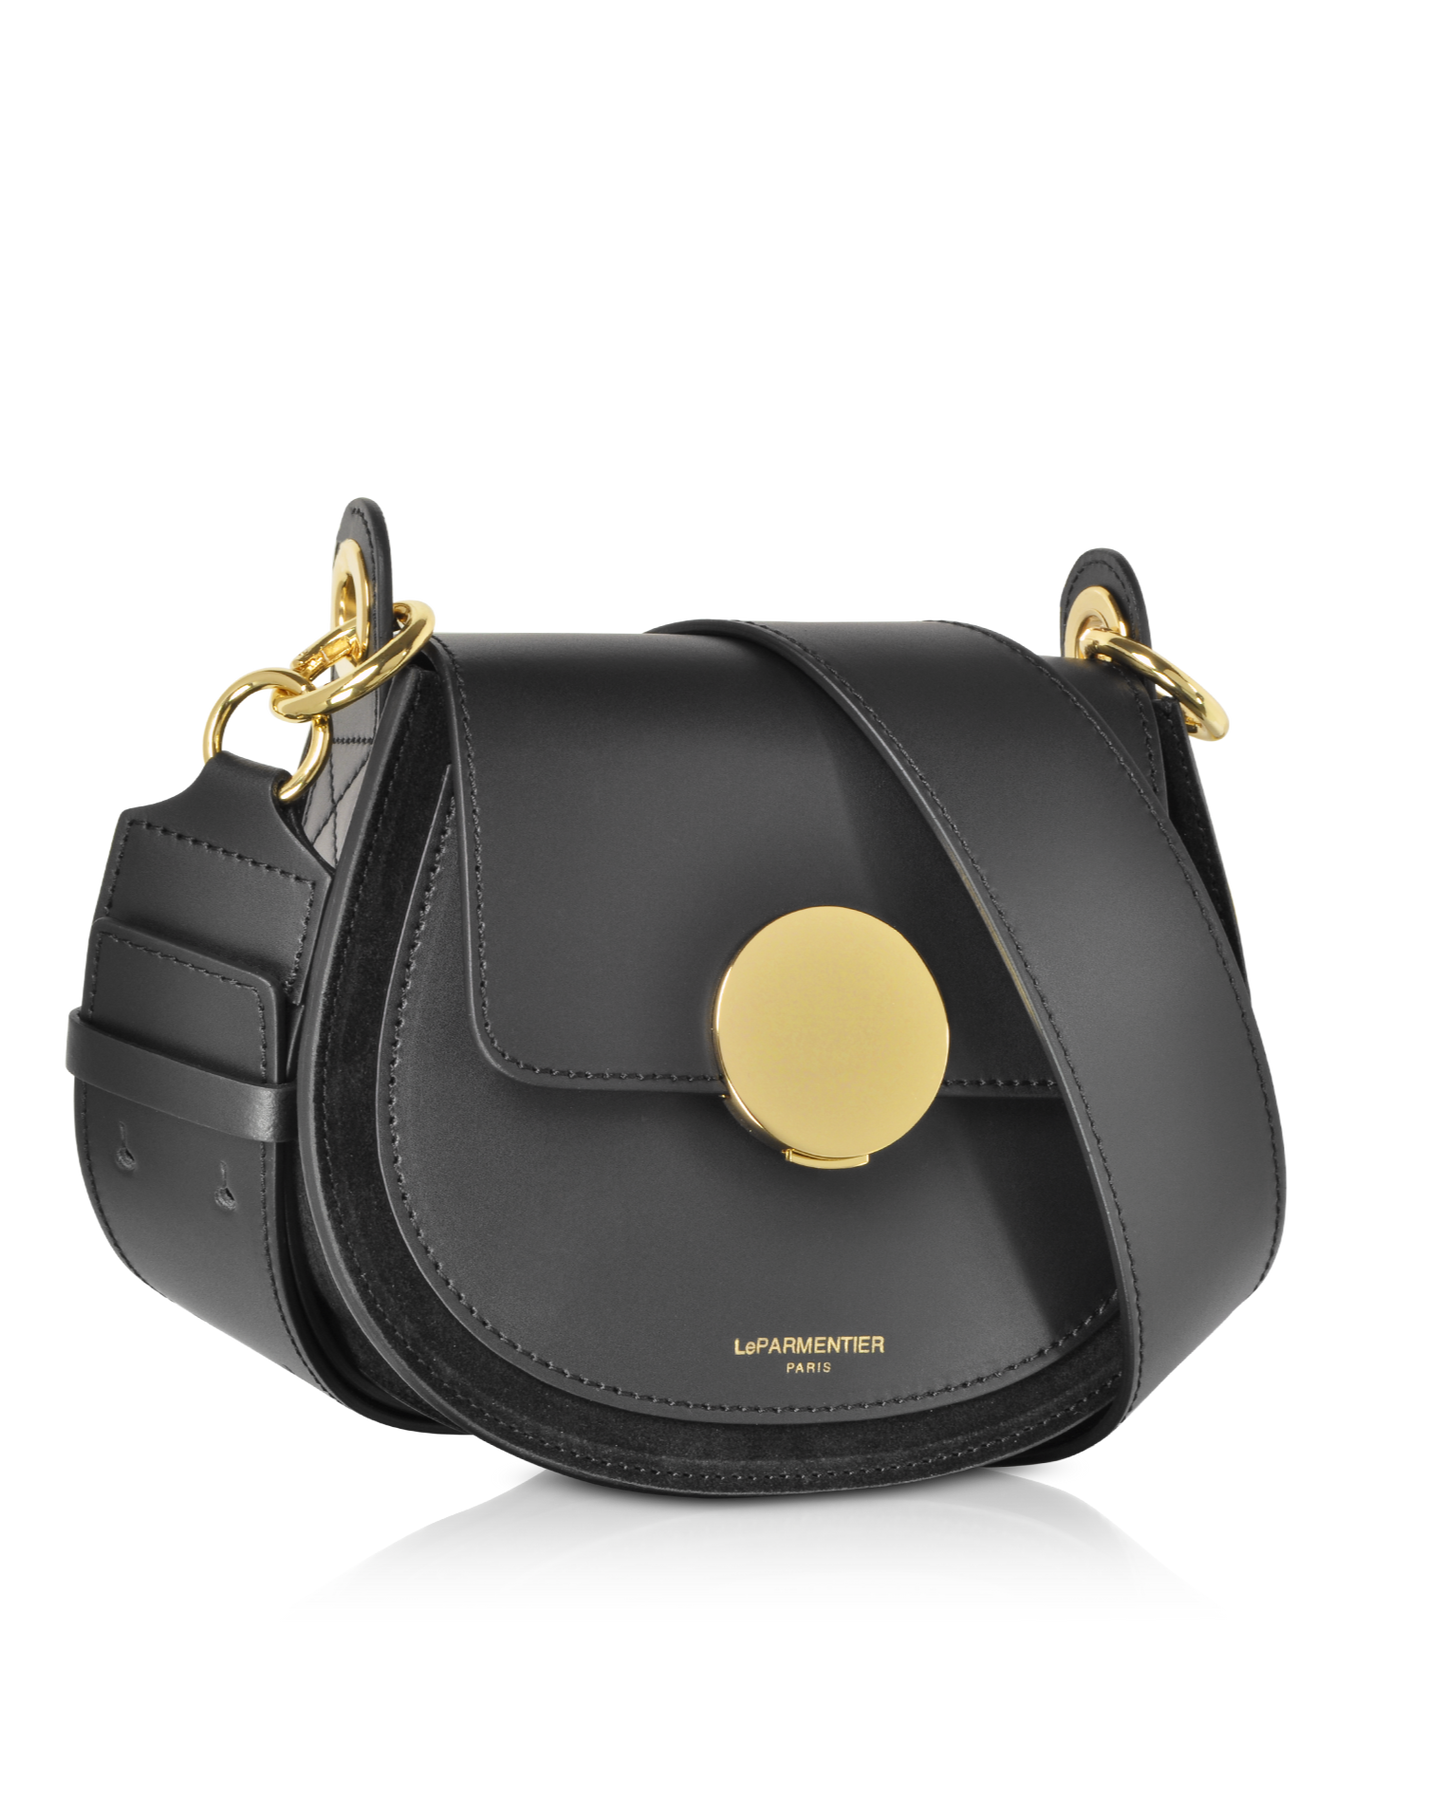 Yucca Shoulder Bag by Le Parmentier at Mazzi d Fiori is crafted in smooth genuine Italian calf leather and velvety suede, pulls out all the stops with its updated take on the classic saddle silhouette that keeps you discreetly organised all the day through to casual fun nights. Featuring flap top magnetic snap closure with bold hardware detail, adjustable wide shoulder strap and gold tone hardware detail